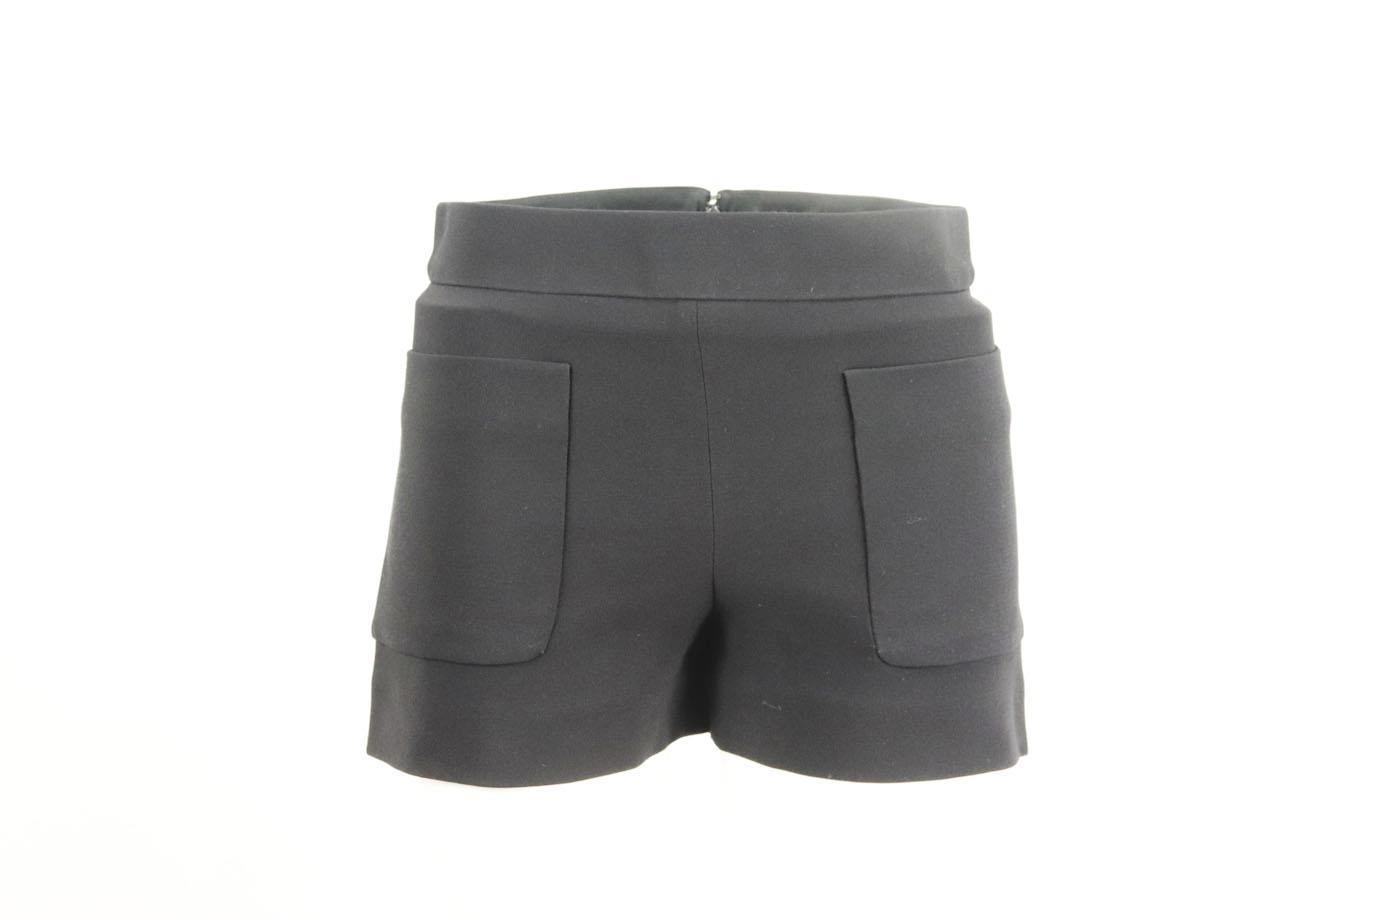 Balenciaga woven shorts. Black. Hook and zip fastening at back. 53% Polyamide, 47% rayon; lining: 100% rayon. Size: FR 36 (UK 8, US 4, IT 40). Waist: 30 in. Hips: 38 in. Length: 12 in. Inseam: 3 in. Rise: 10.5 in
